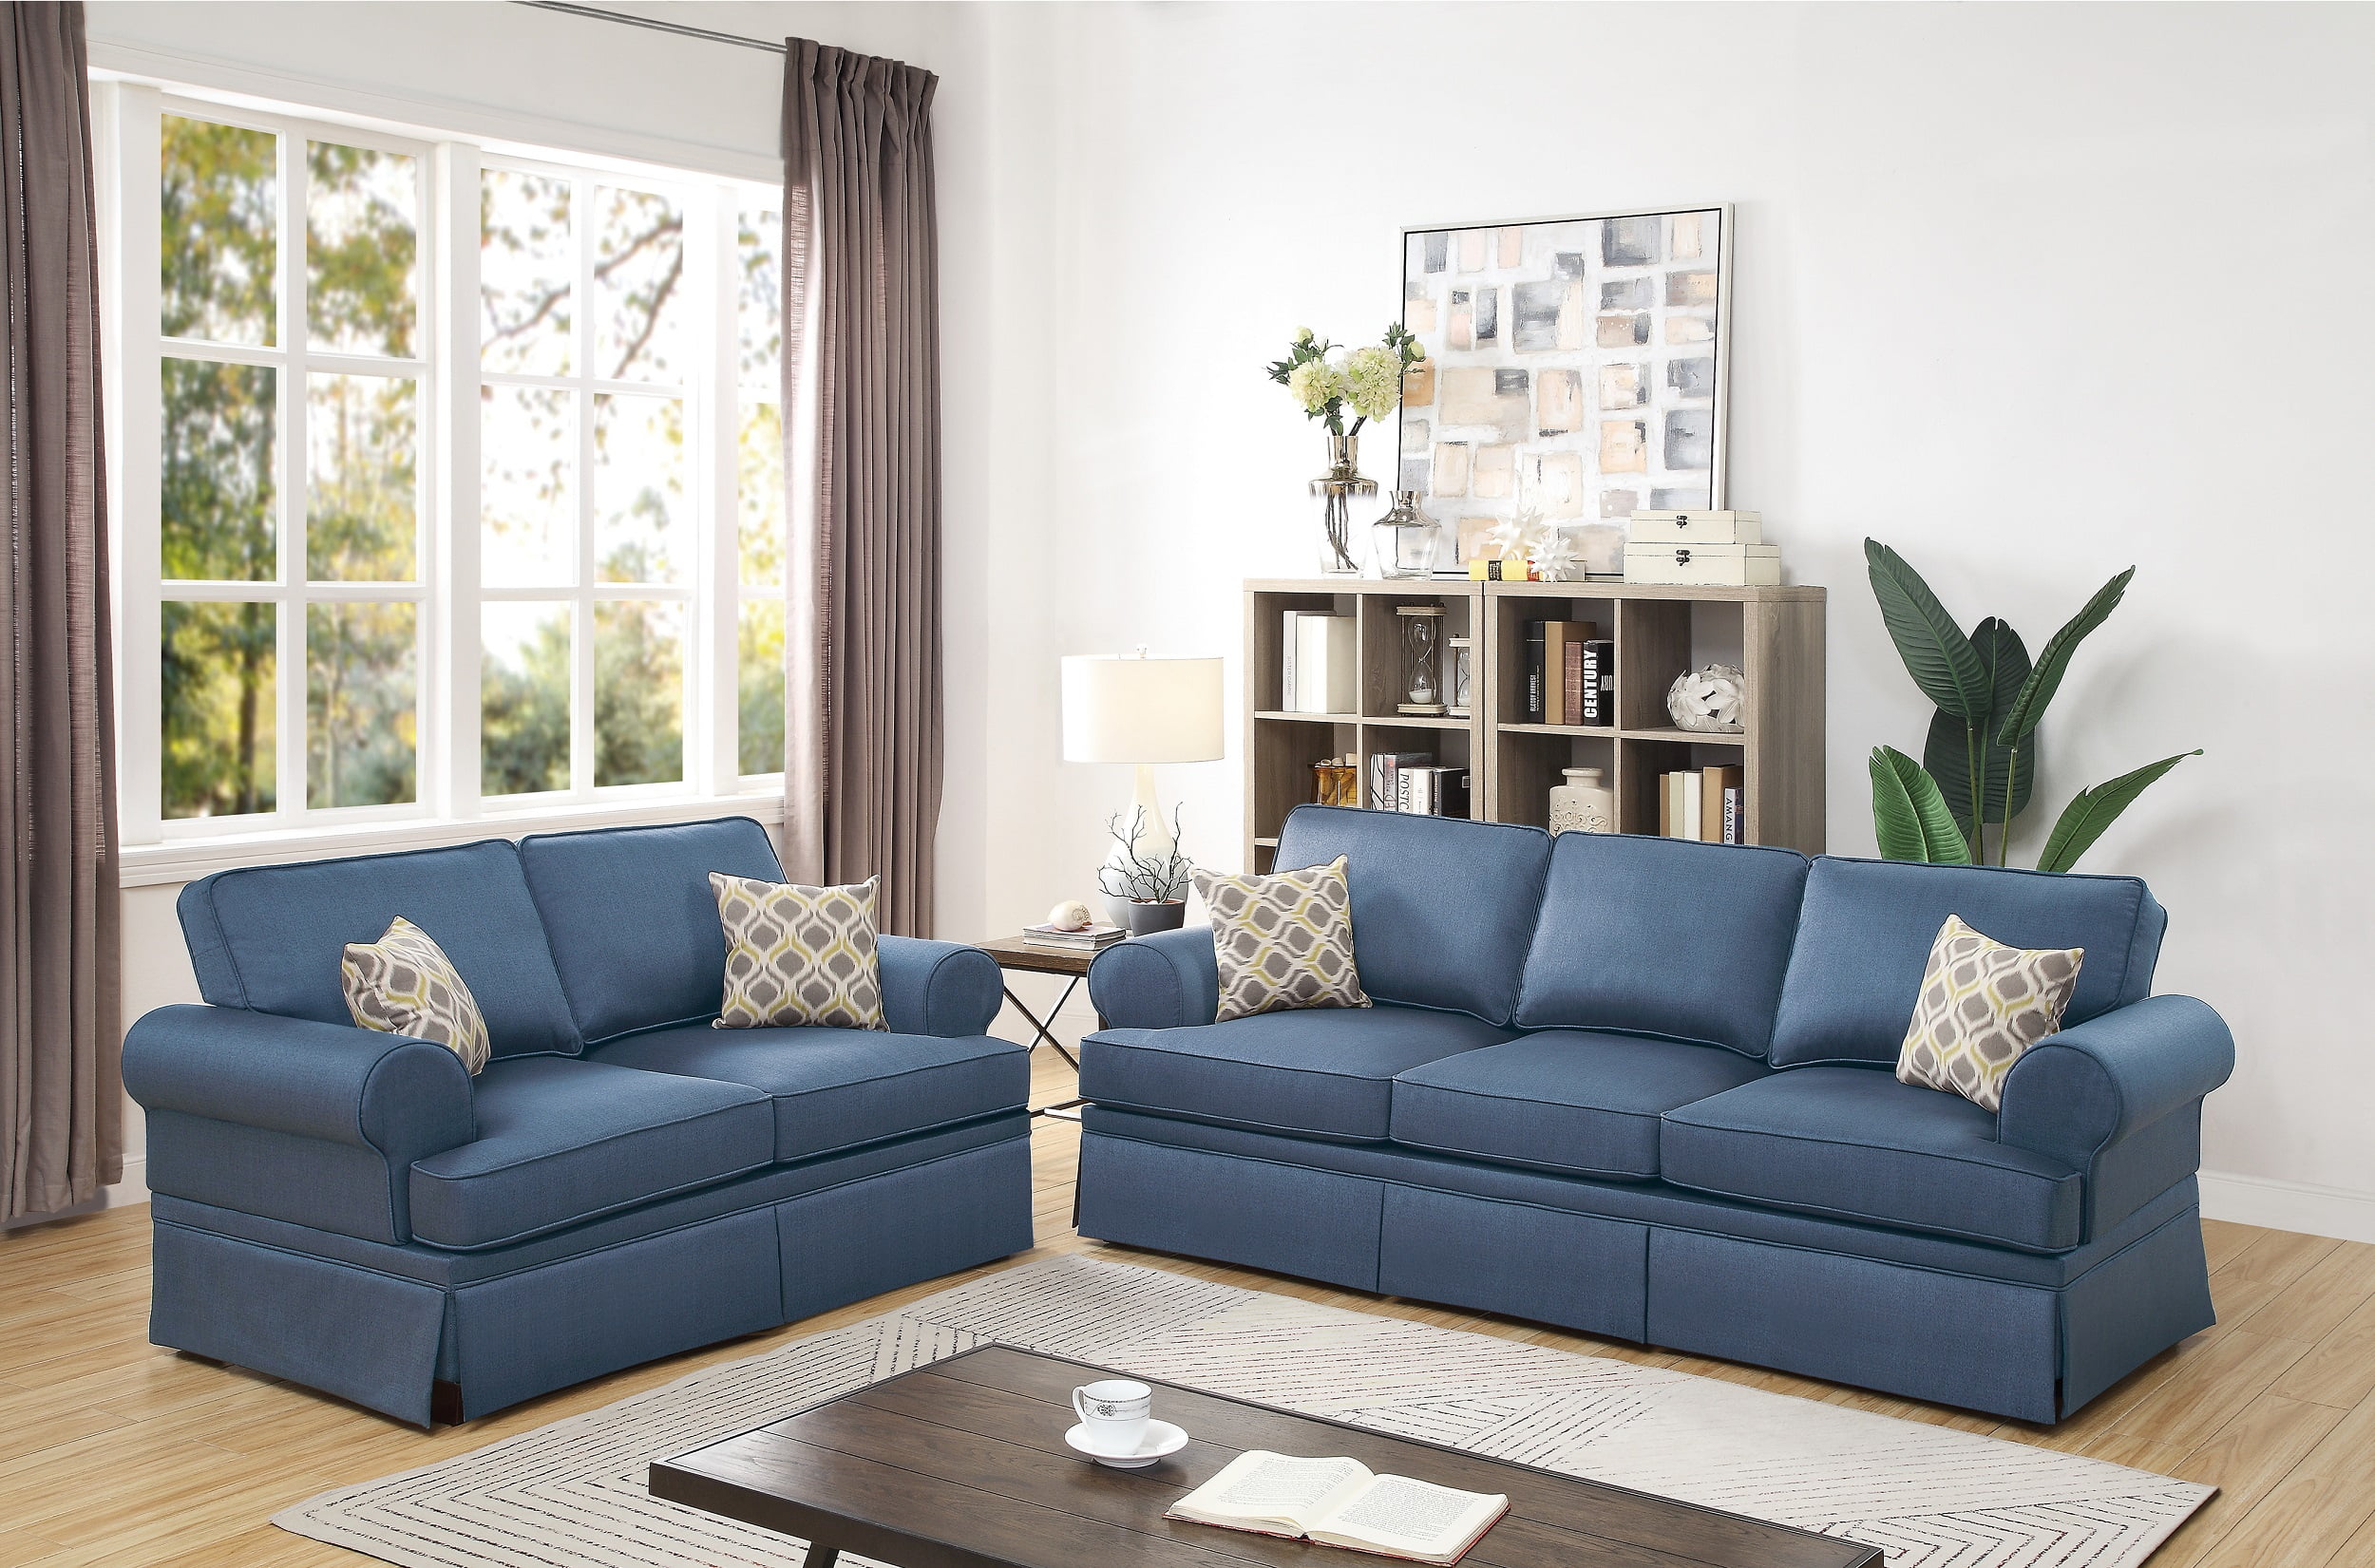 Sofa Set For Living Room Low Price